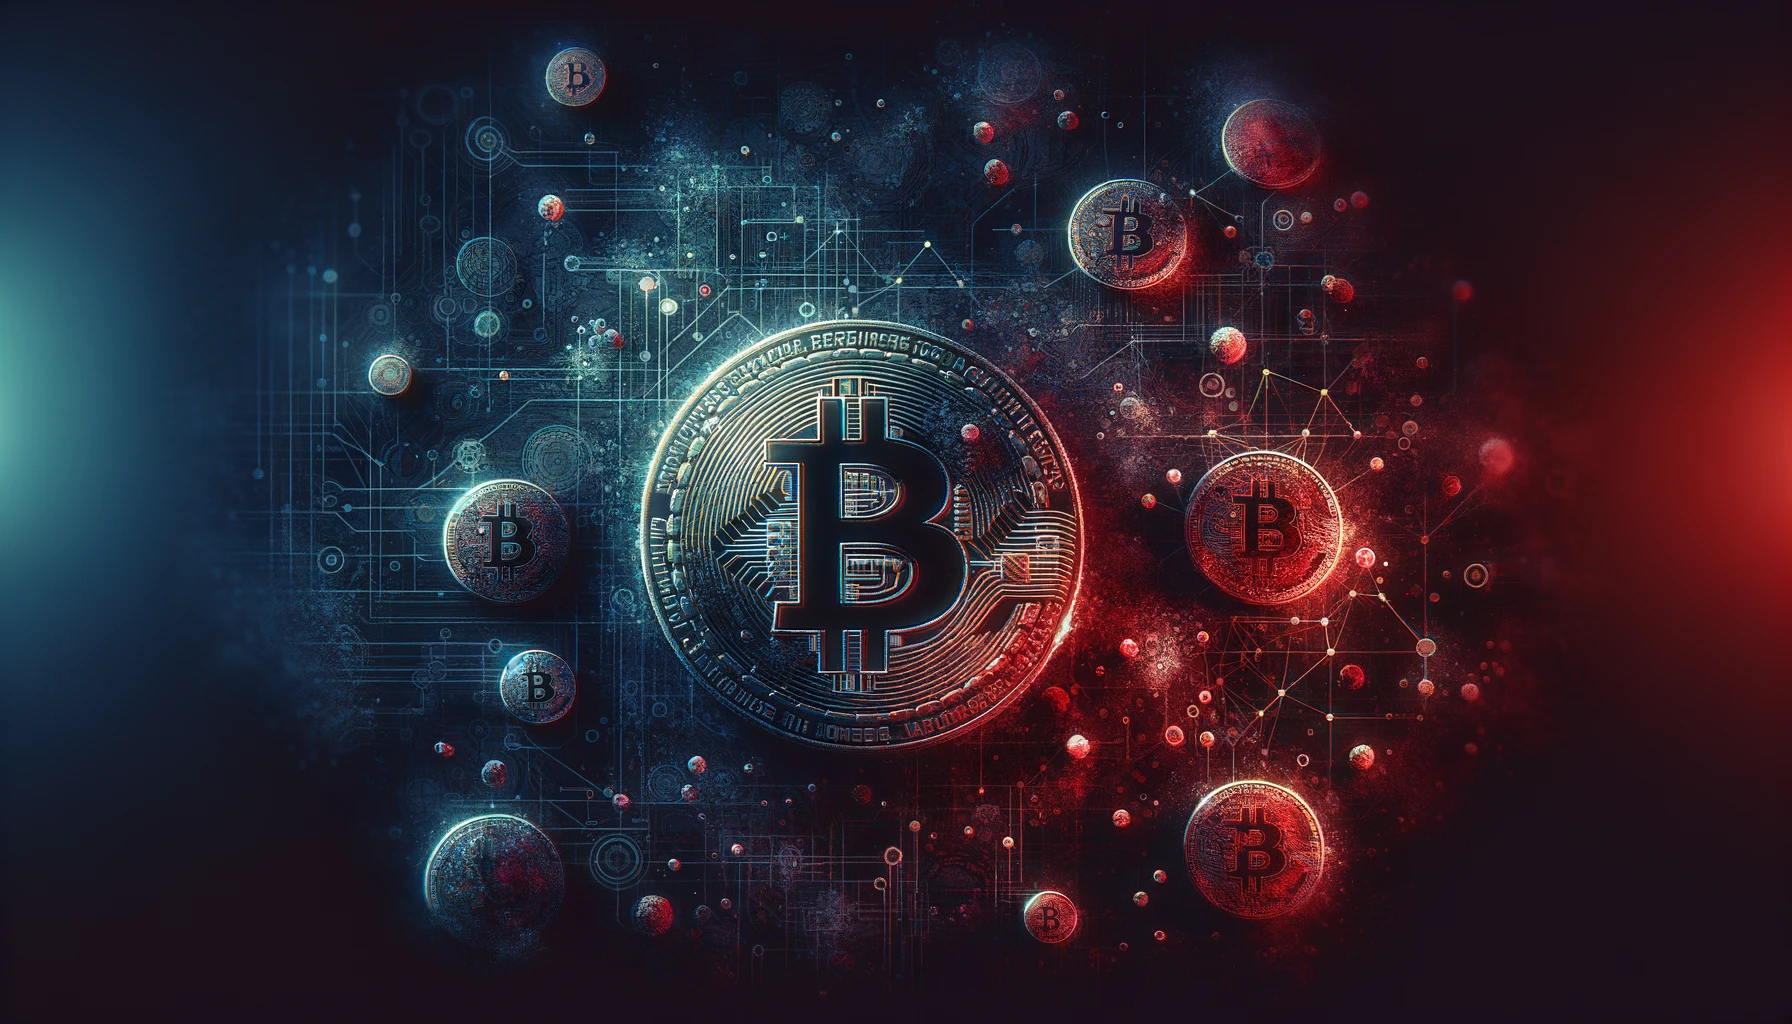 Tainted Bitcoins: Myths, Realities, and Impact